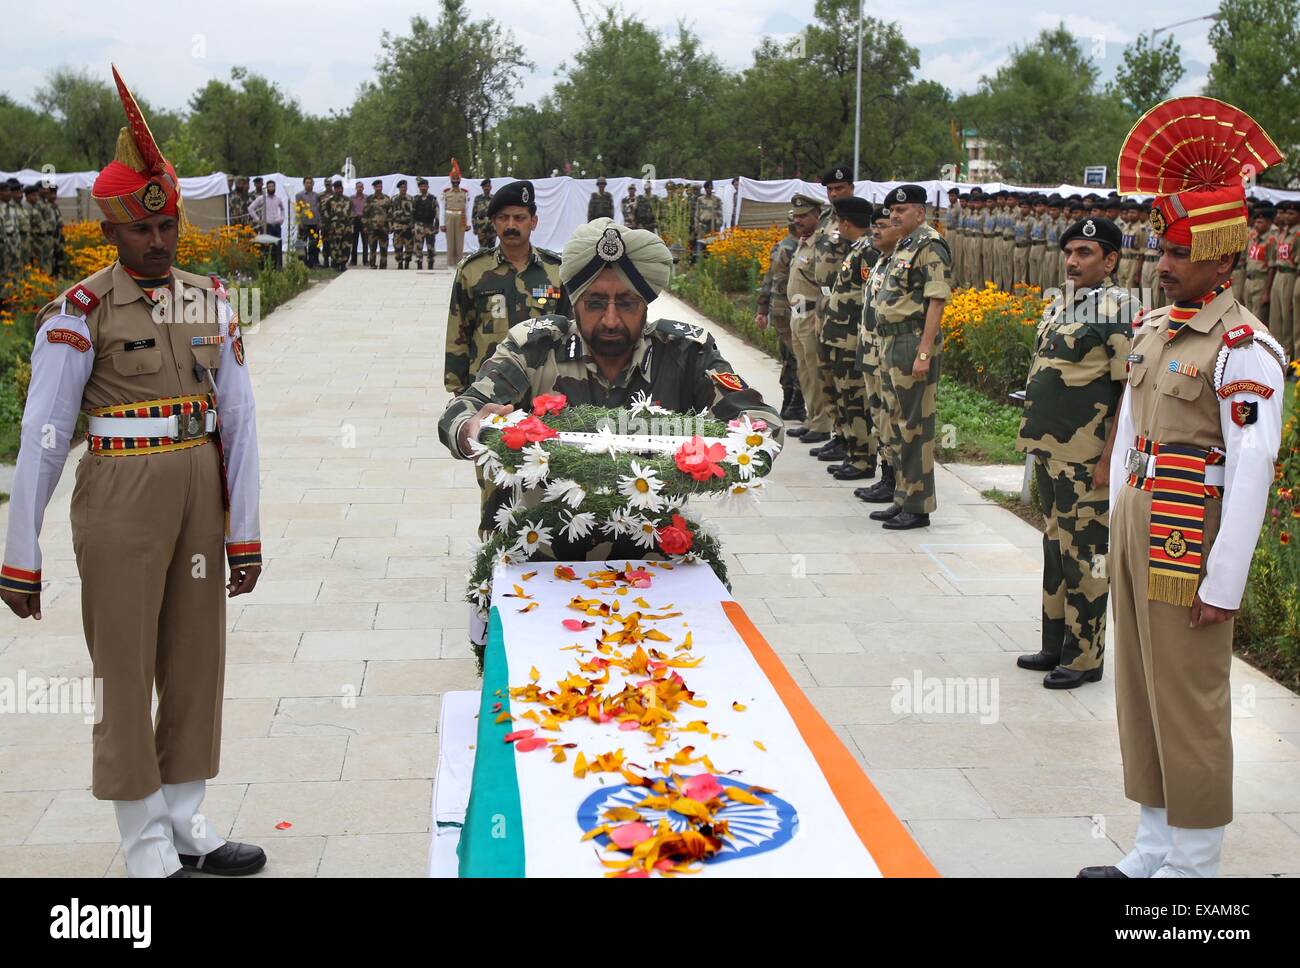 Srinagar, Indian-controlled Kashmir. 10th July, 2015. A senior officer of India's Border Security Force (BSF) lays a floral wreath on the coffin of a border guard at their base camp in Humhama, on the outskirts of Srinagar, summer capital of Indian-controlled Kashmir, on July 10, 2015. A border guard of India's BSF has been killed in firing from Pakistan side on Line of Control (LoC) dividing Kashmir. Credit:  Javed Dar/Xinhua/Alamy Live News Stock Photo